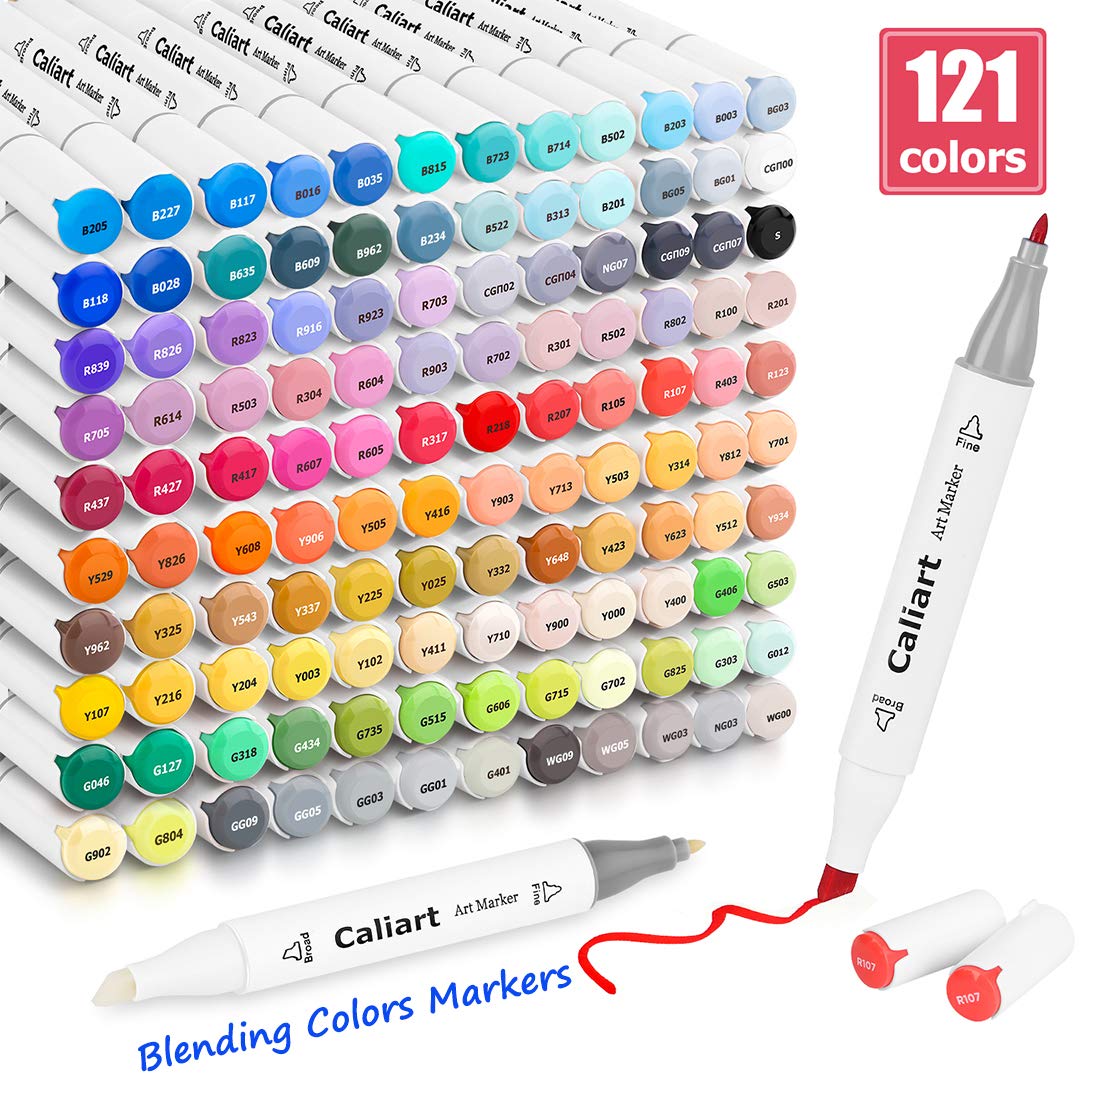  Caliart 121 Colors Alcohol Based Markers, Dual Tip